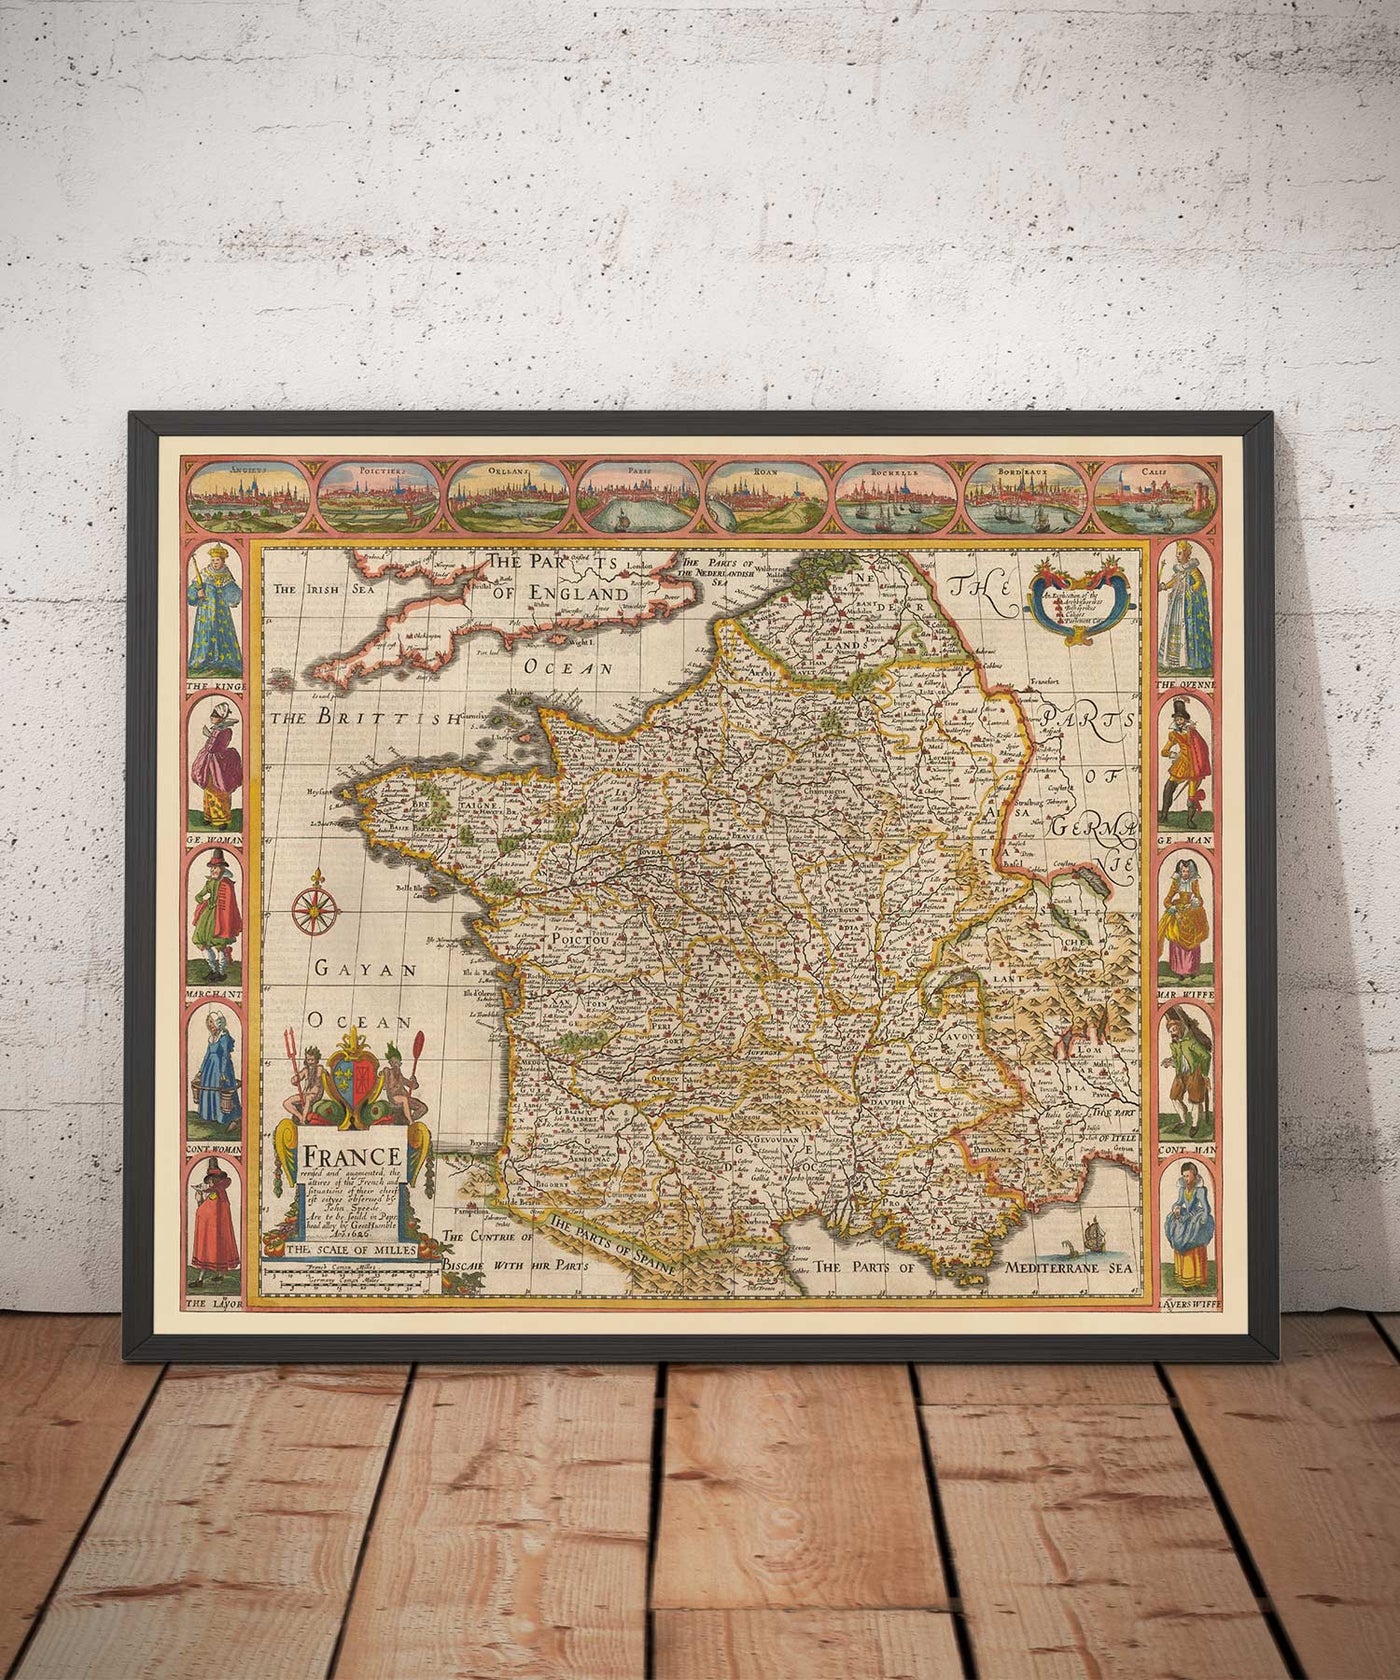 Old Handcoloured Map of France, 1627 by John Speed - Belgium, Normandy, Brittany, Cote d'Azur, Pyrenees